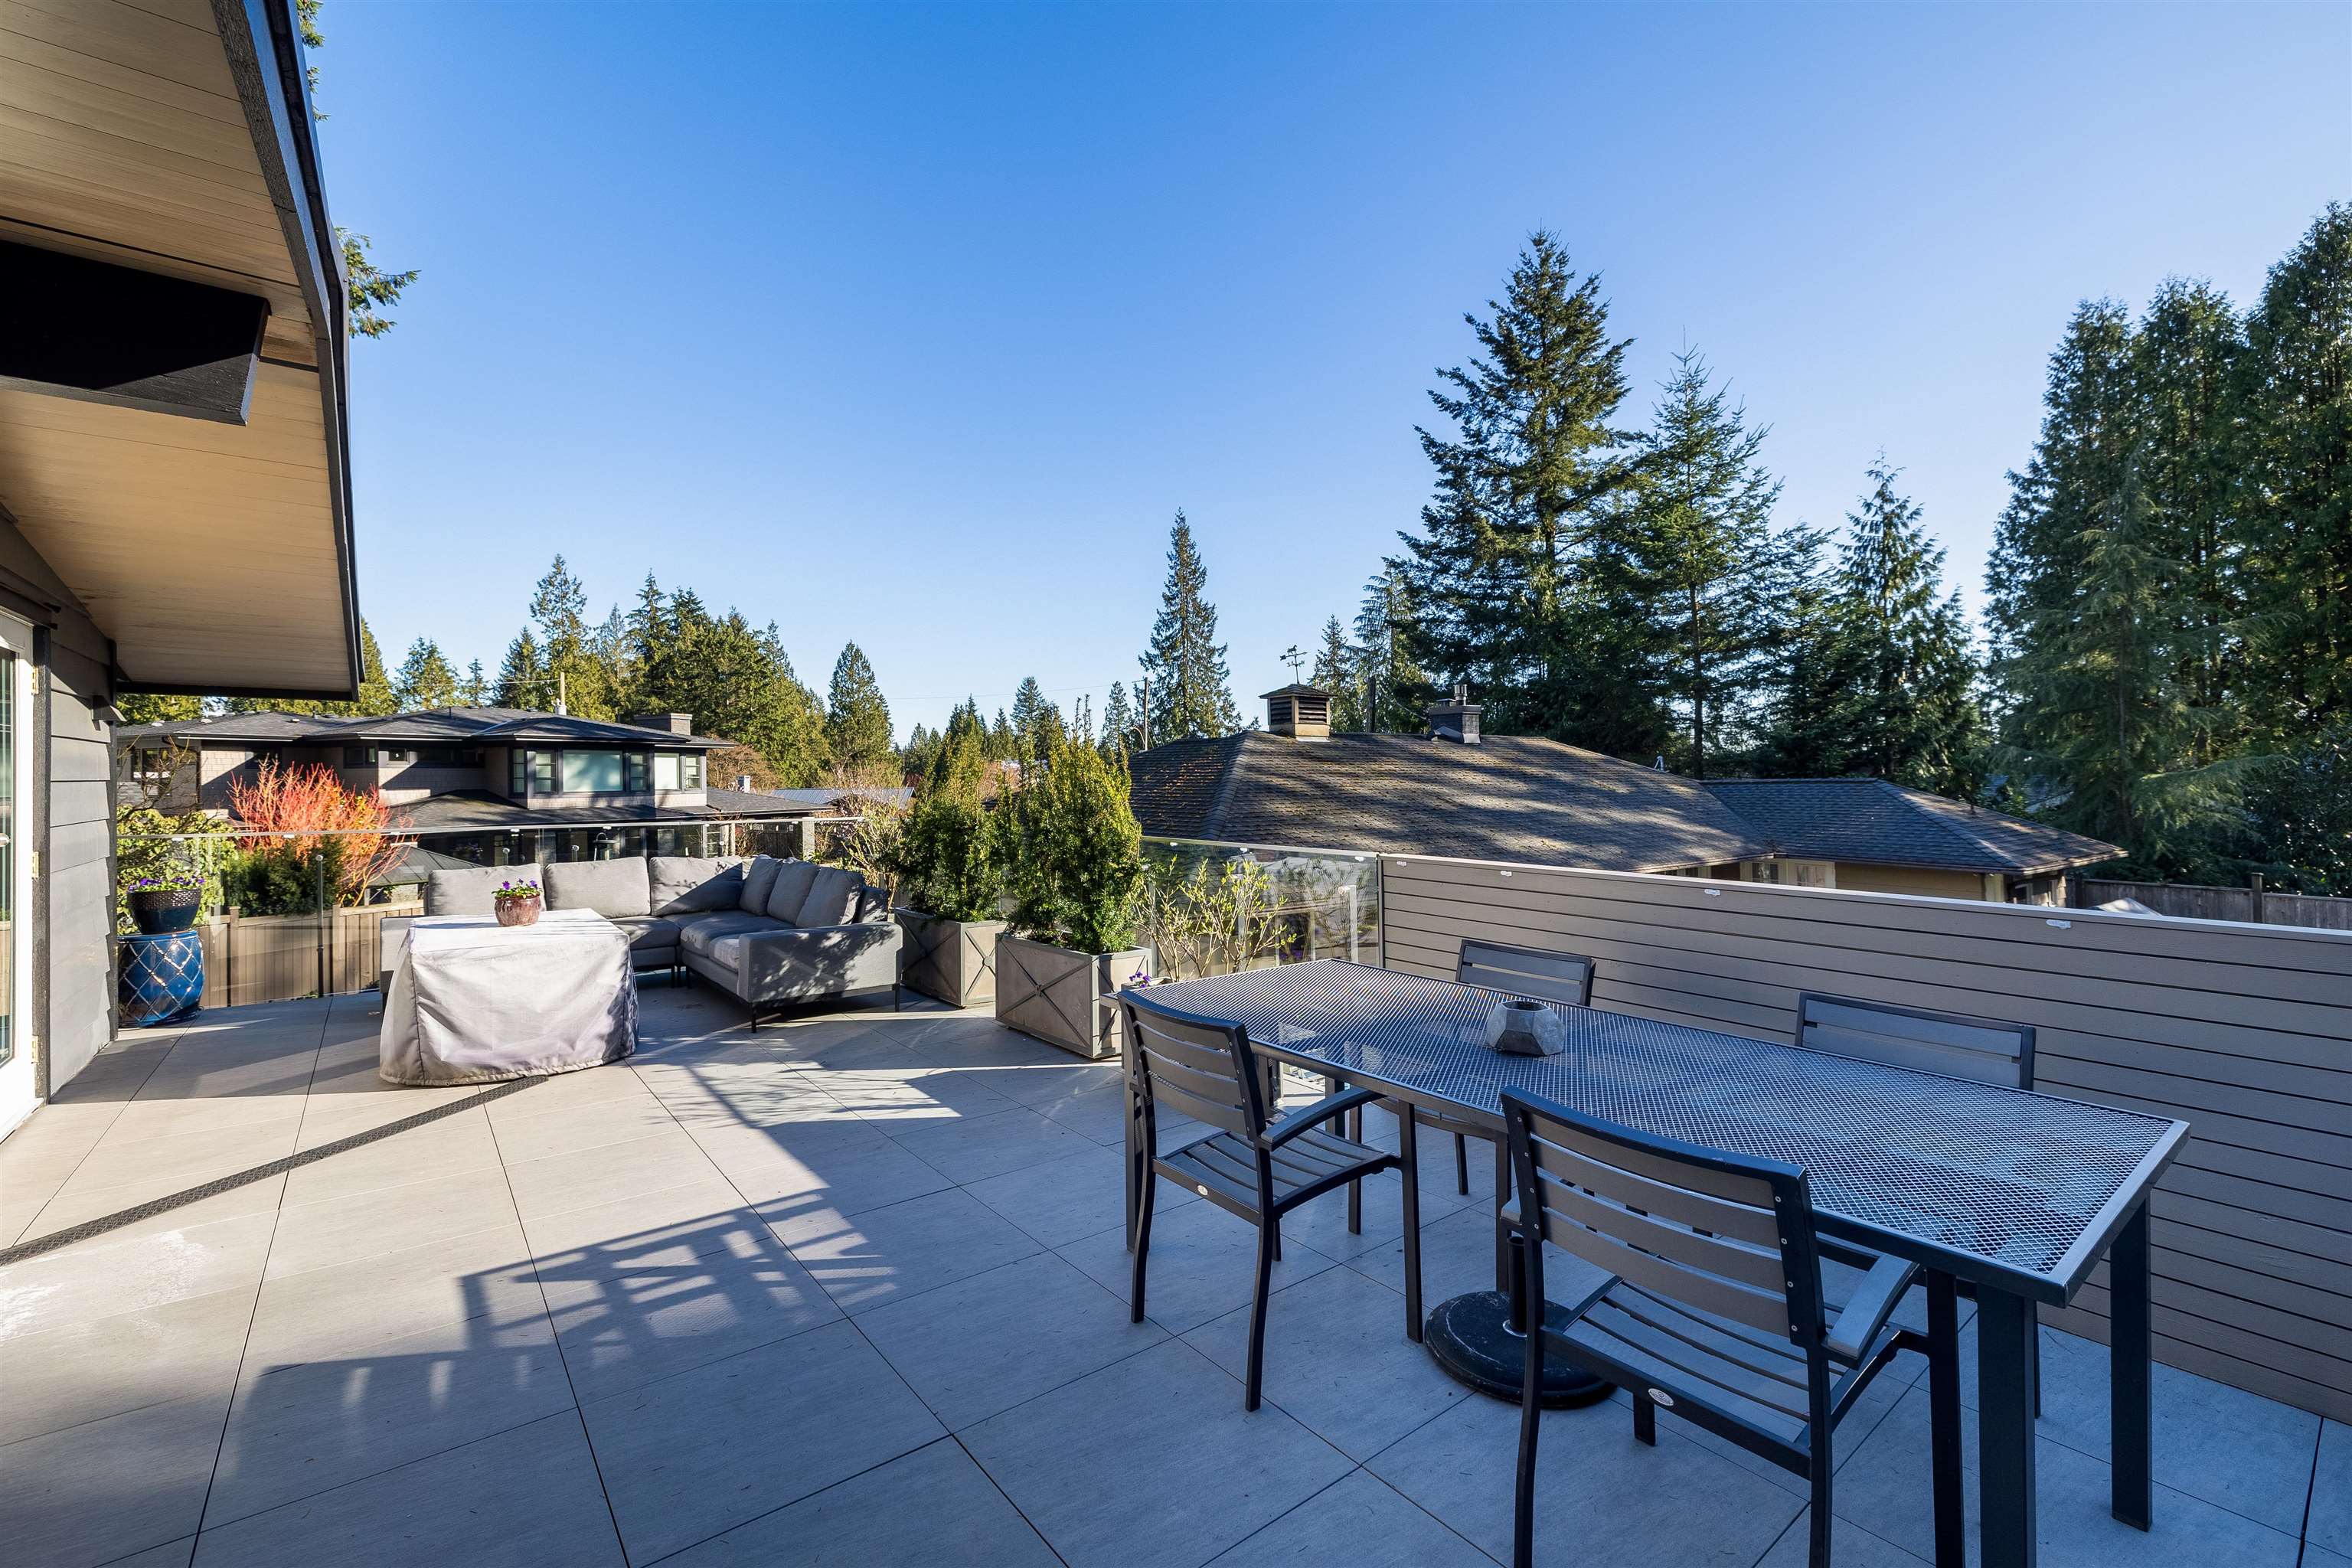 Listing image of 3735 RIVIERE PLACE